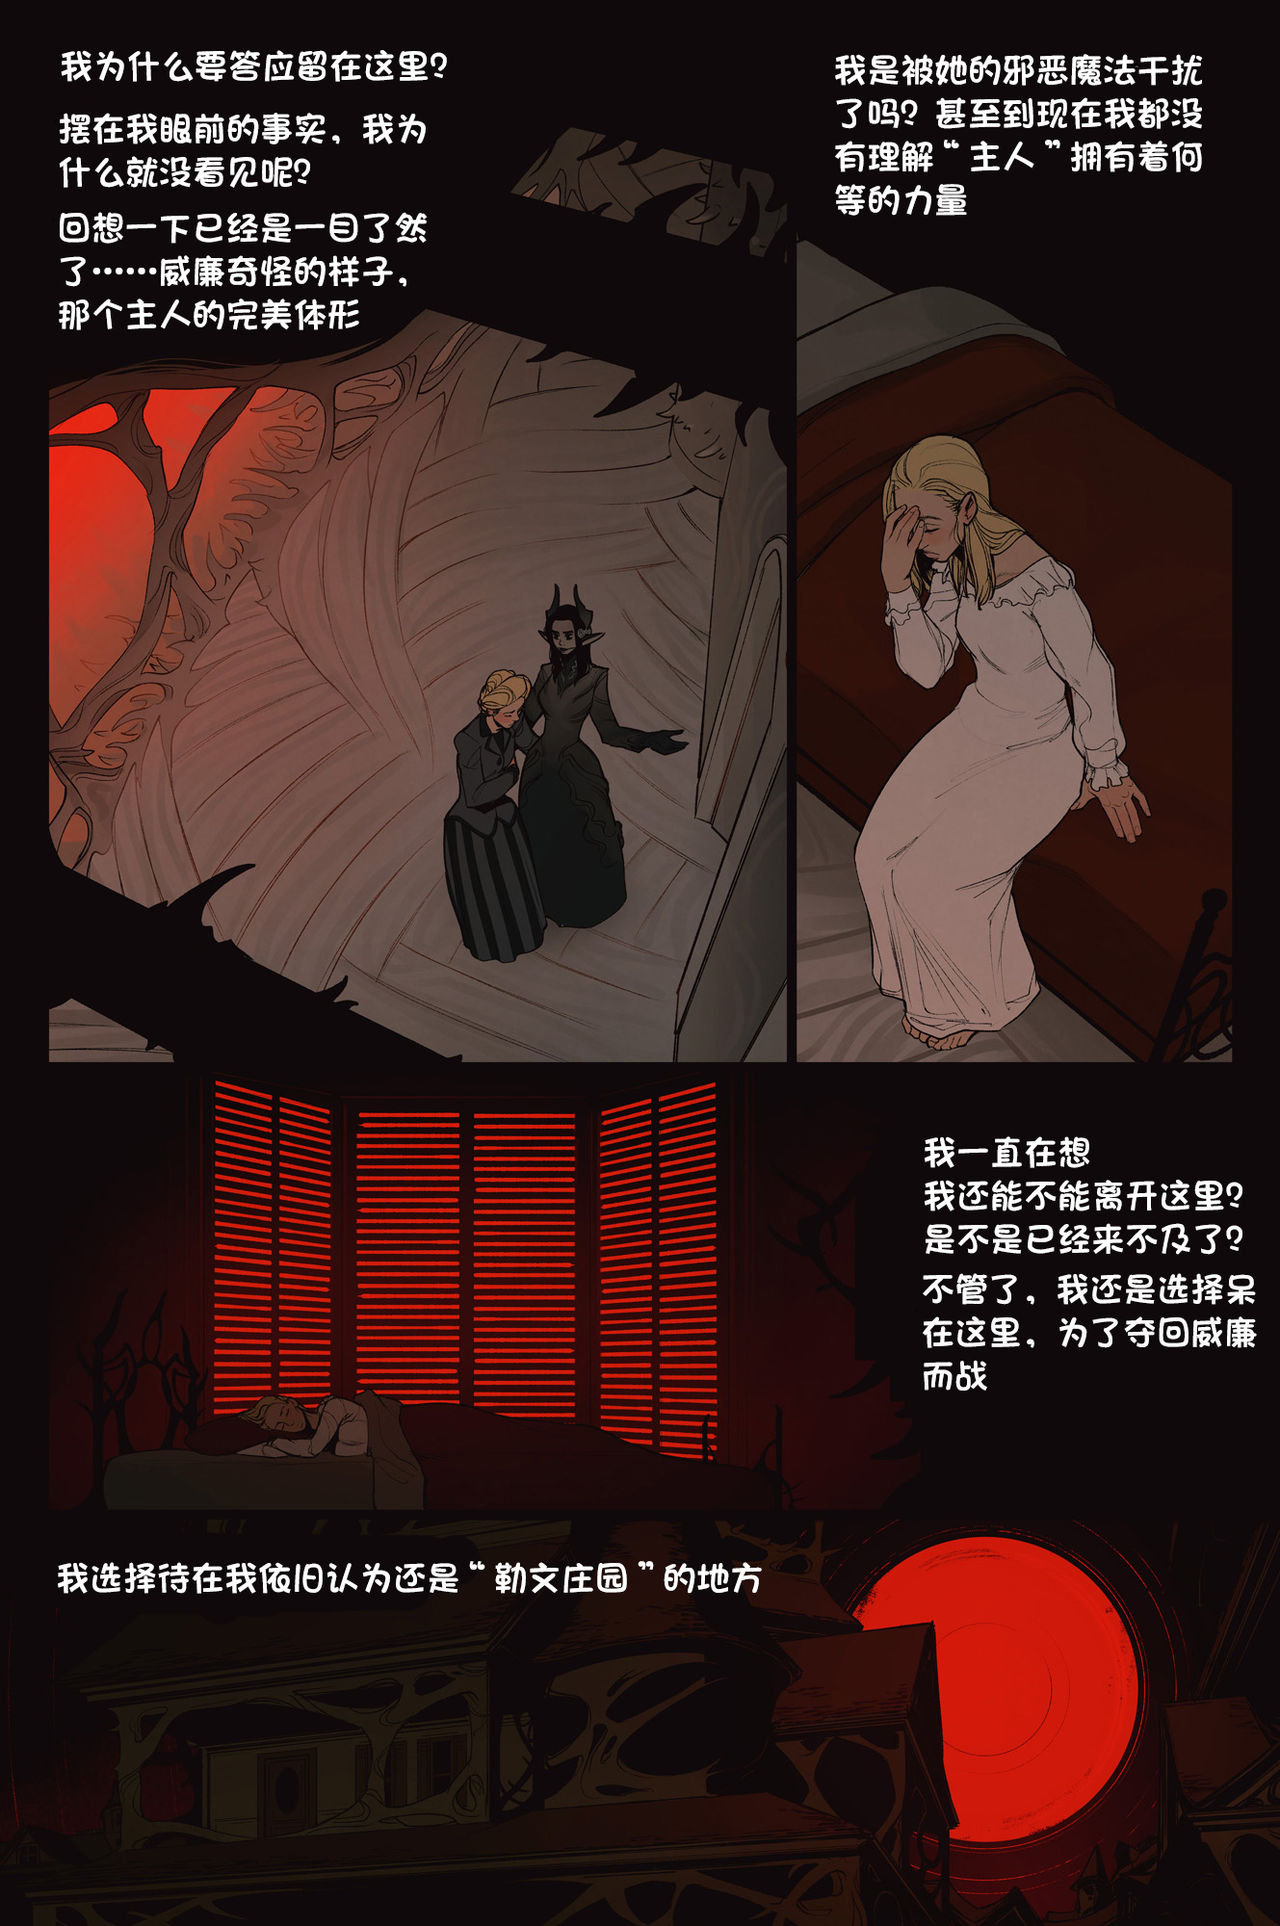 [InCase] The Invitation Ch. 1-2 [Chinese] [这很恶堕汉化组] [InCase] The Invitation Ch. 1-2 [中国翻訳]